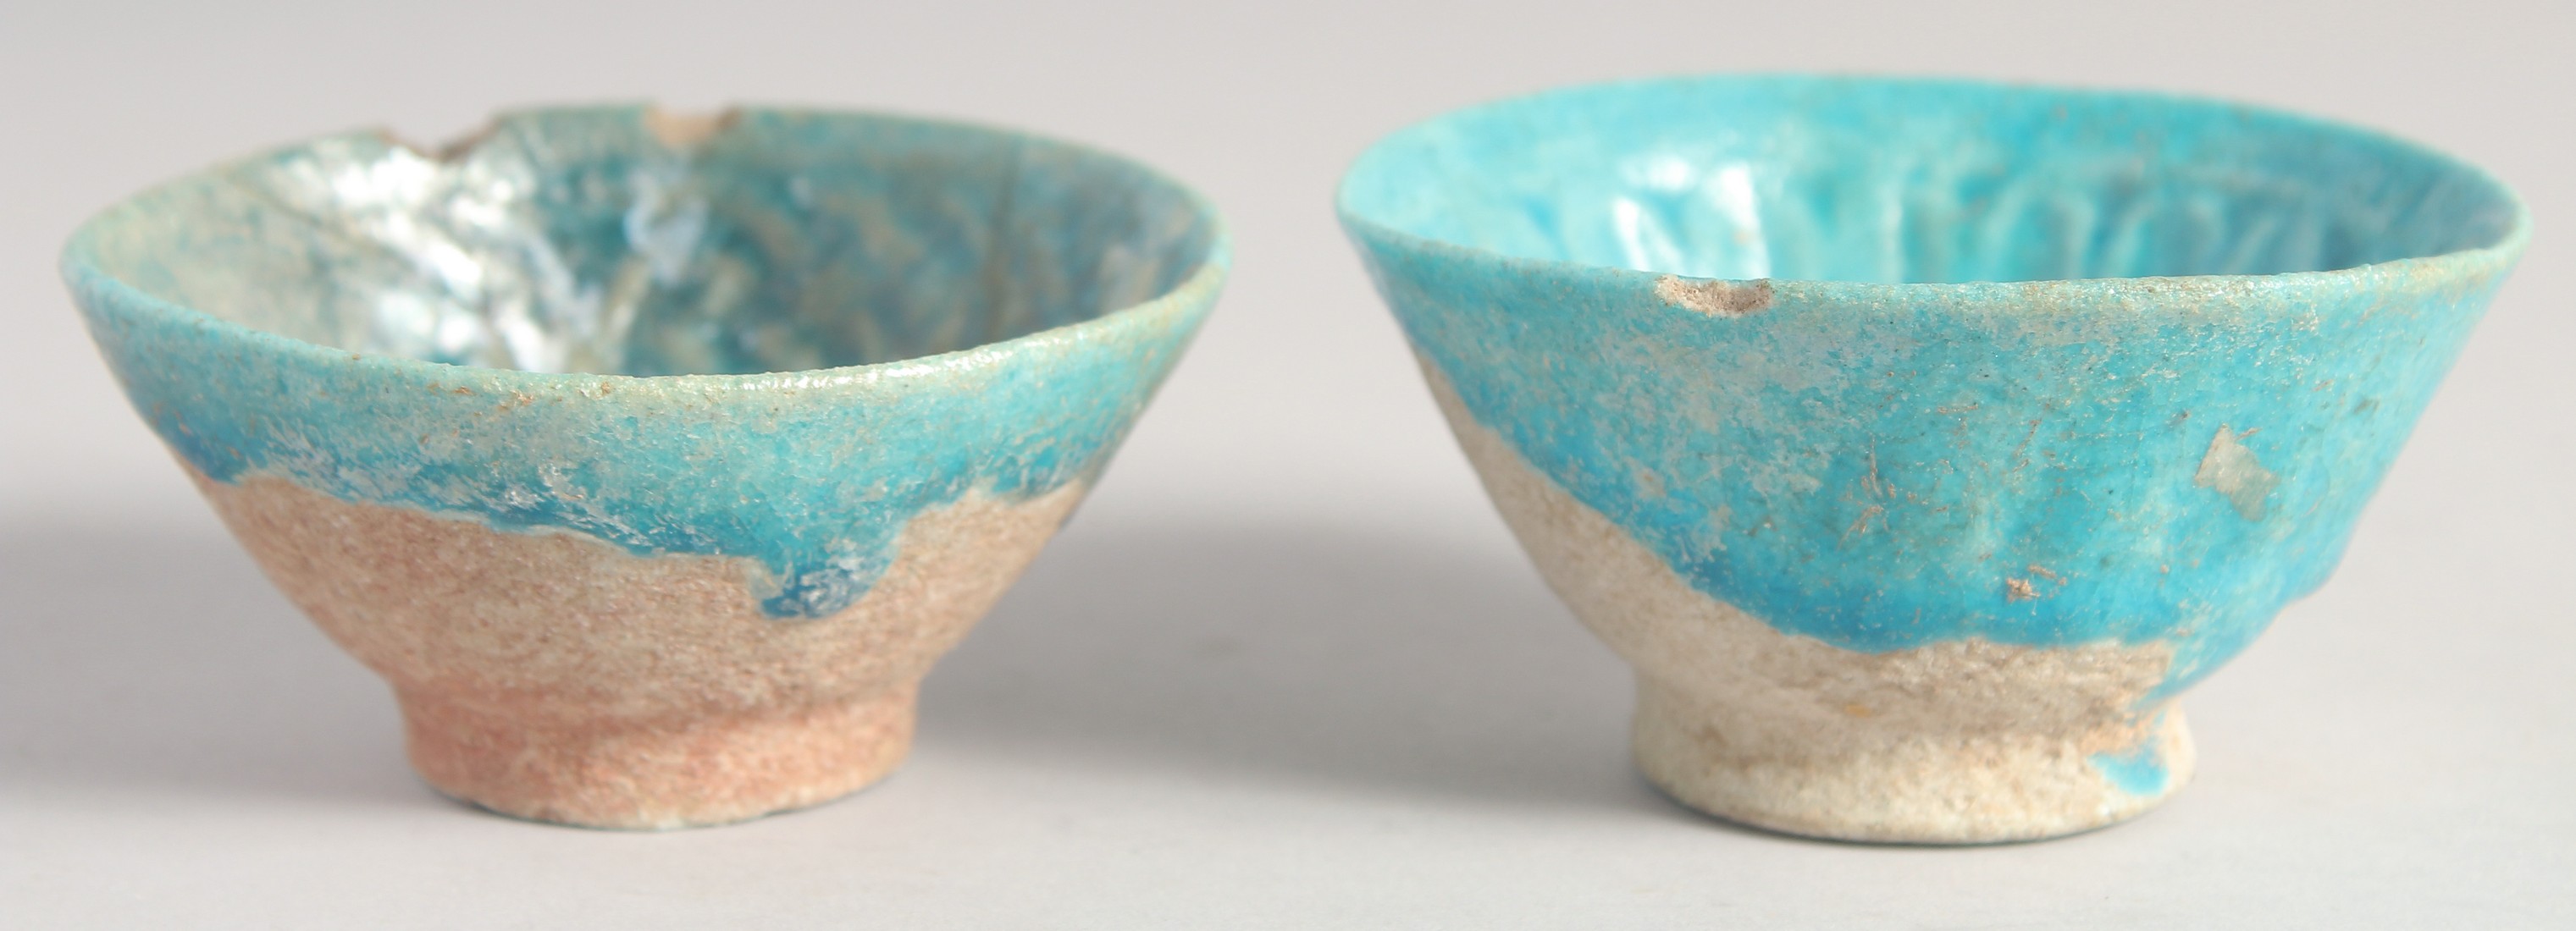 A PAIR OF TWELFTH CENTURY IRAN KASHAN GLAZED TURQUOISE POTTERY BOWLS. Both 8.5cm diameter